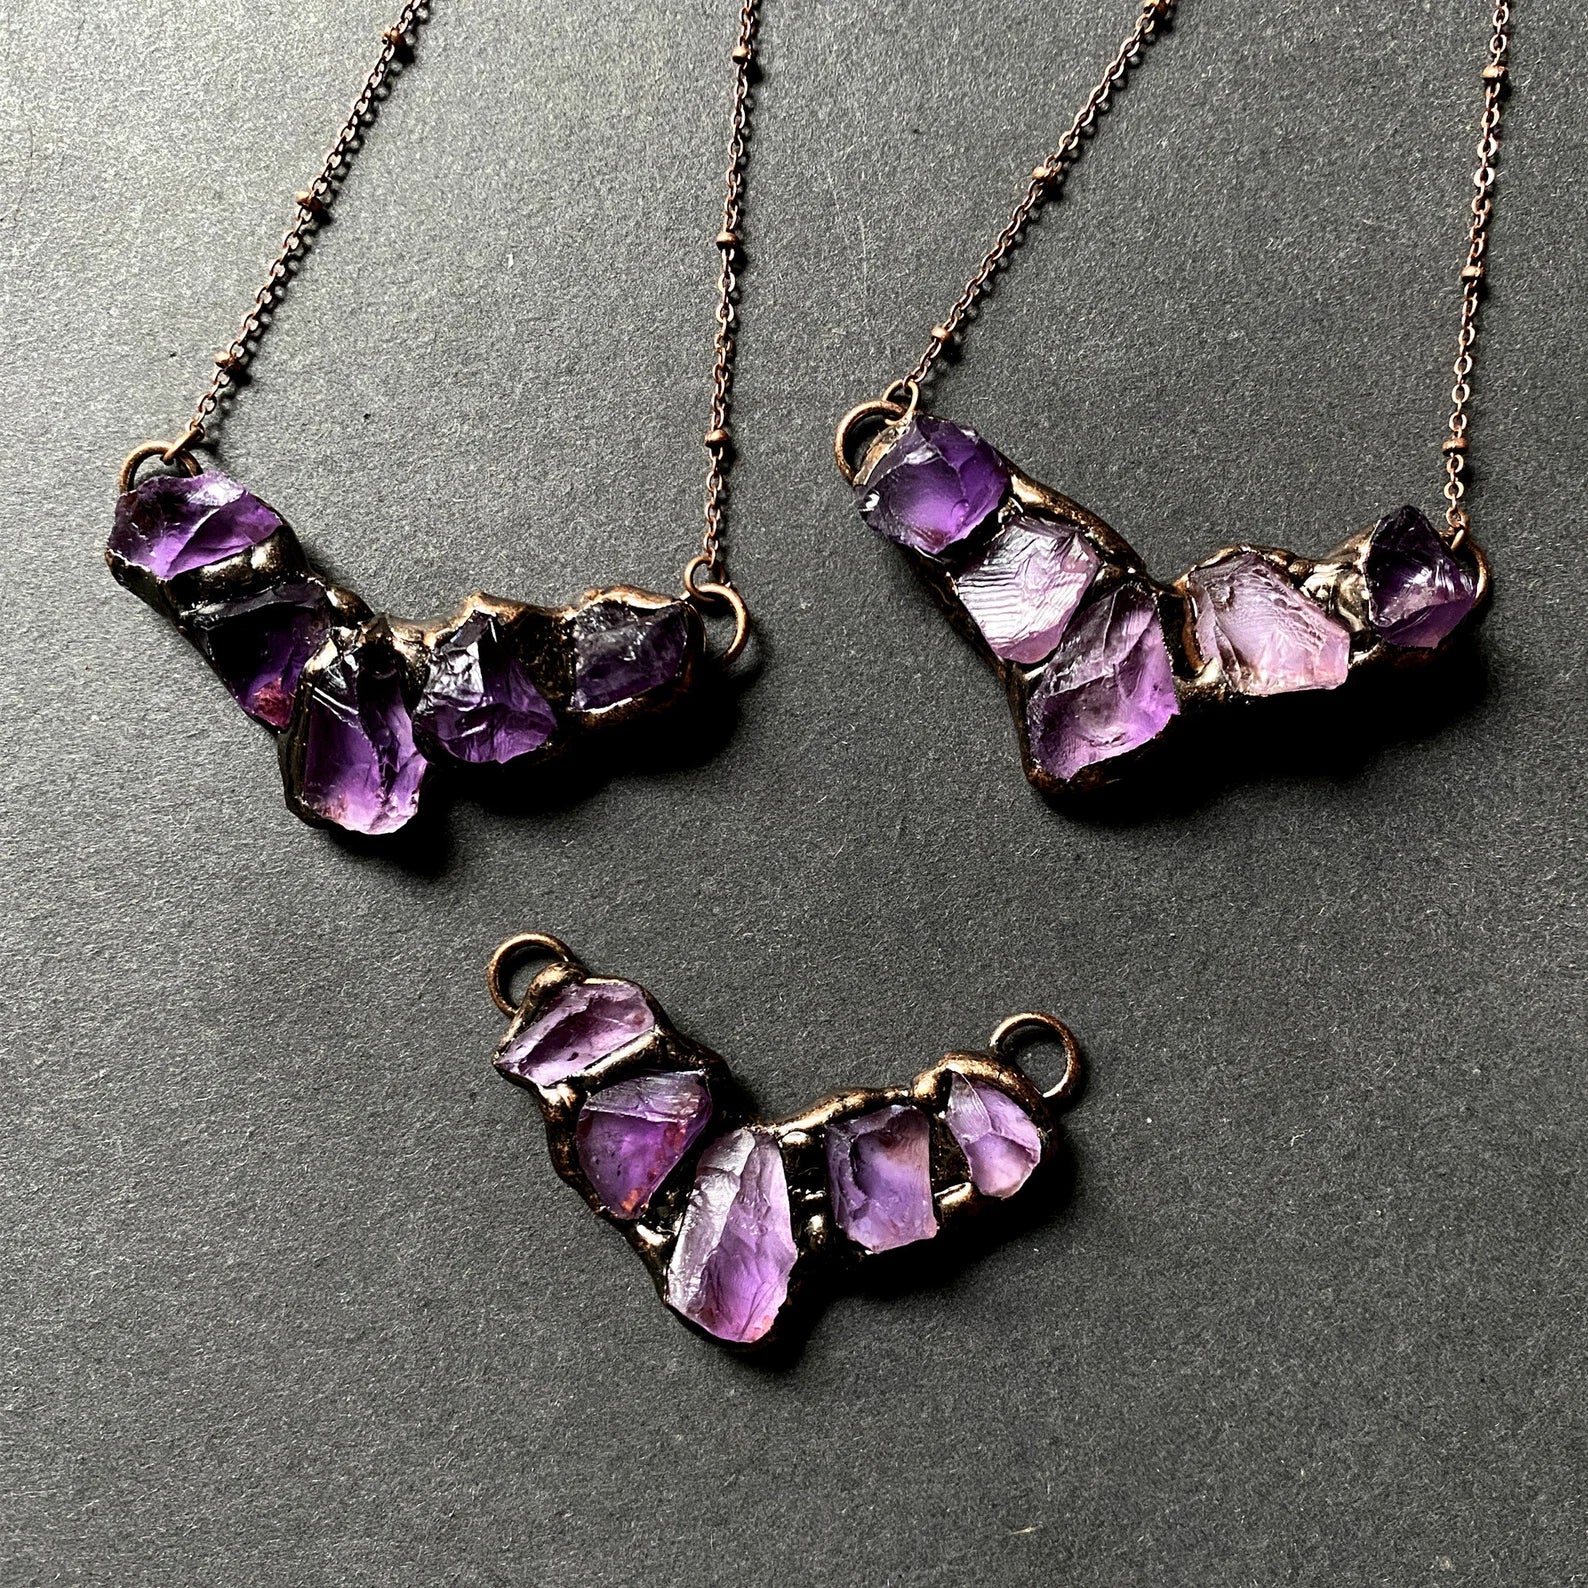 Whole Store Raw Amethyst 5 piece Pendant with Antique Rose Gold Plated Necklace